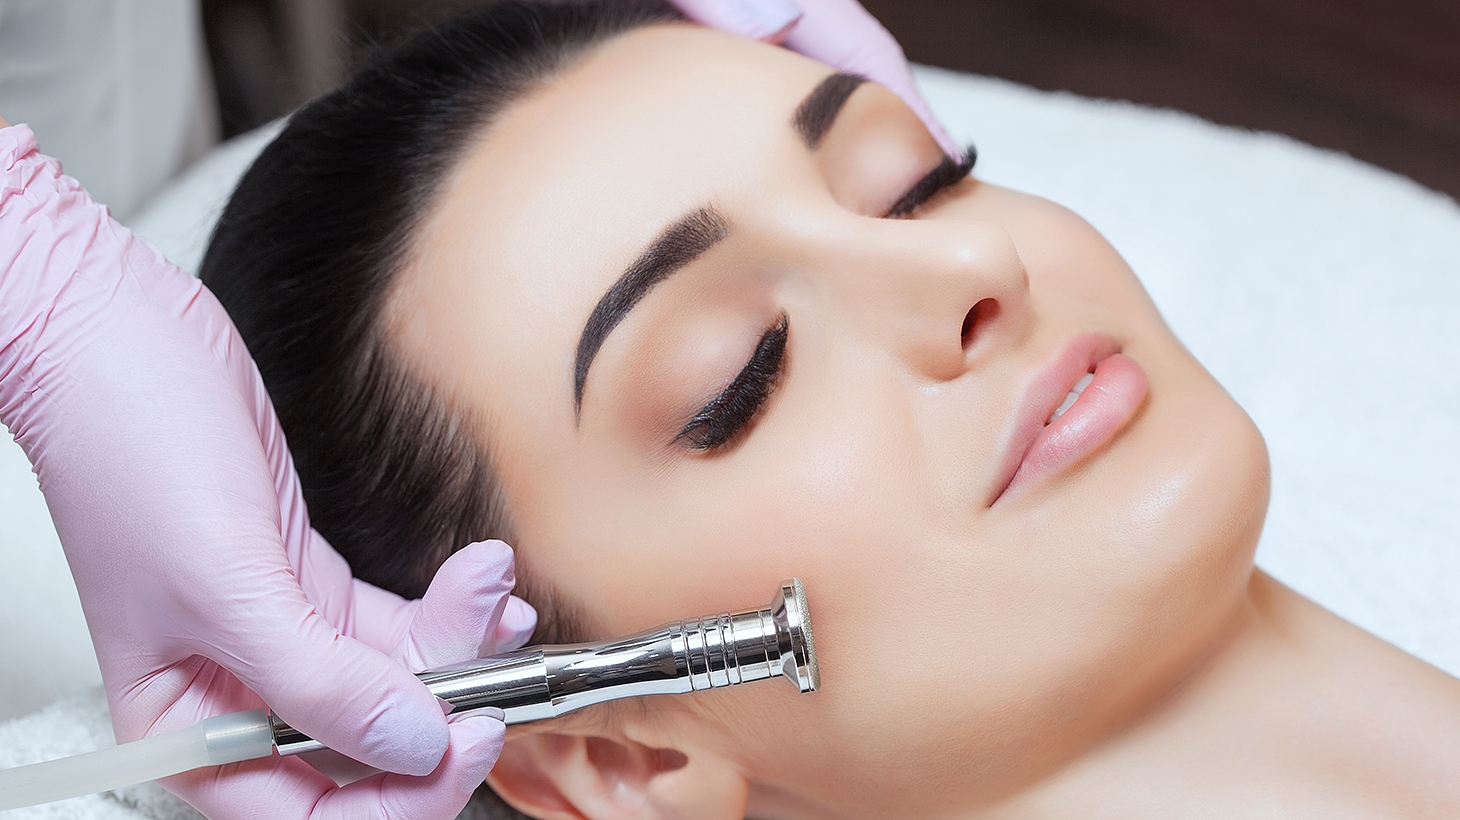 Northbridge Microdermabrasion Facial And Head Massage Package From Beaubelle Beauty Clinic